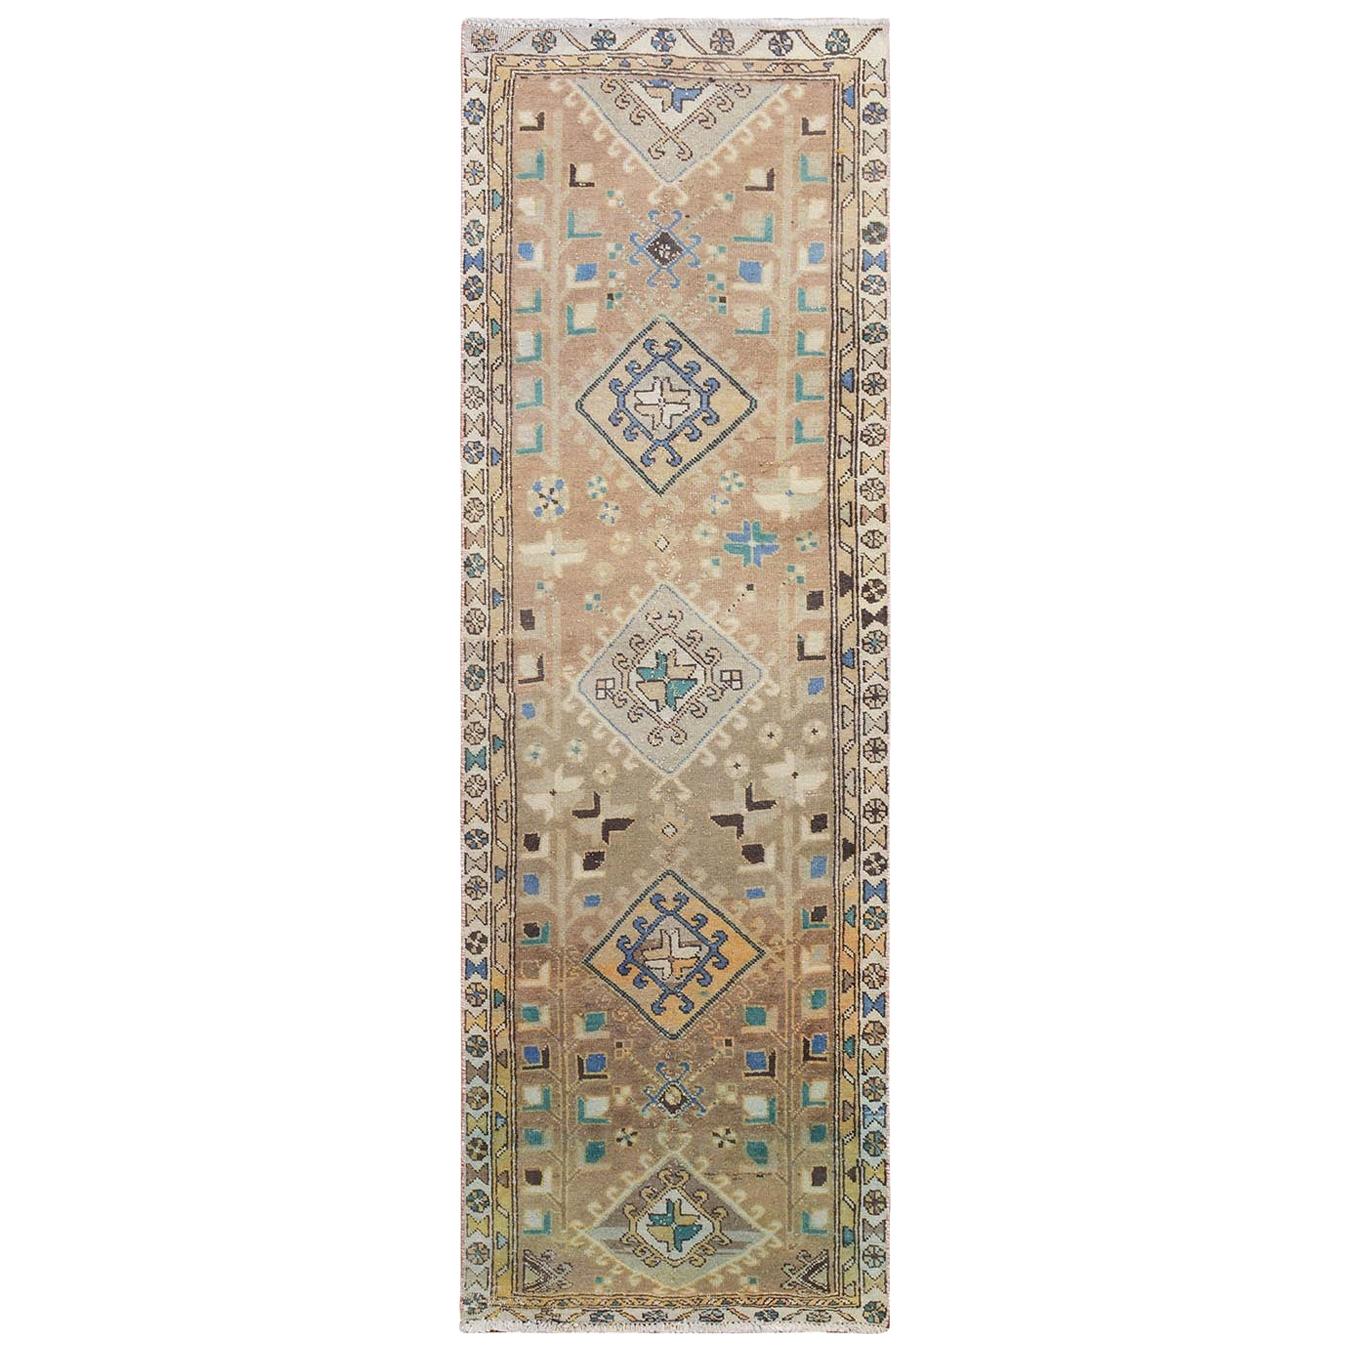 Natural Colors Worn Down and Vintage North West Persian Runner Hand Knotted Rug